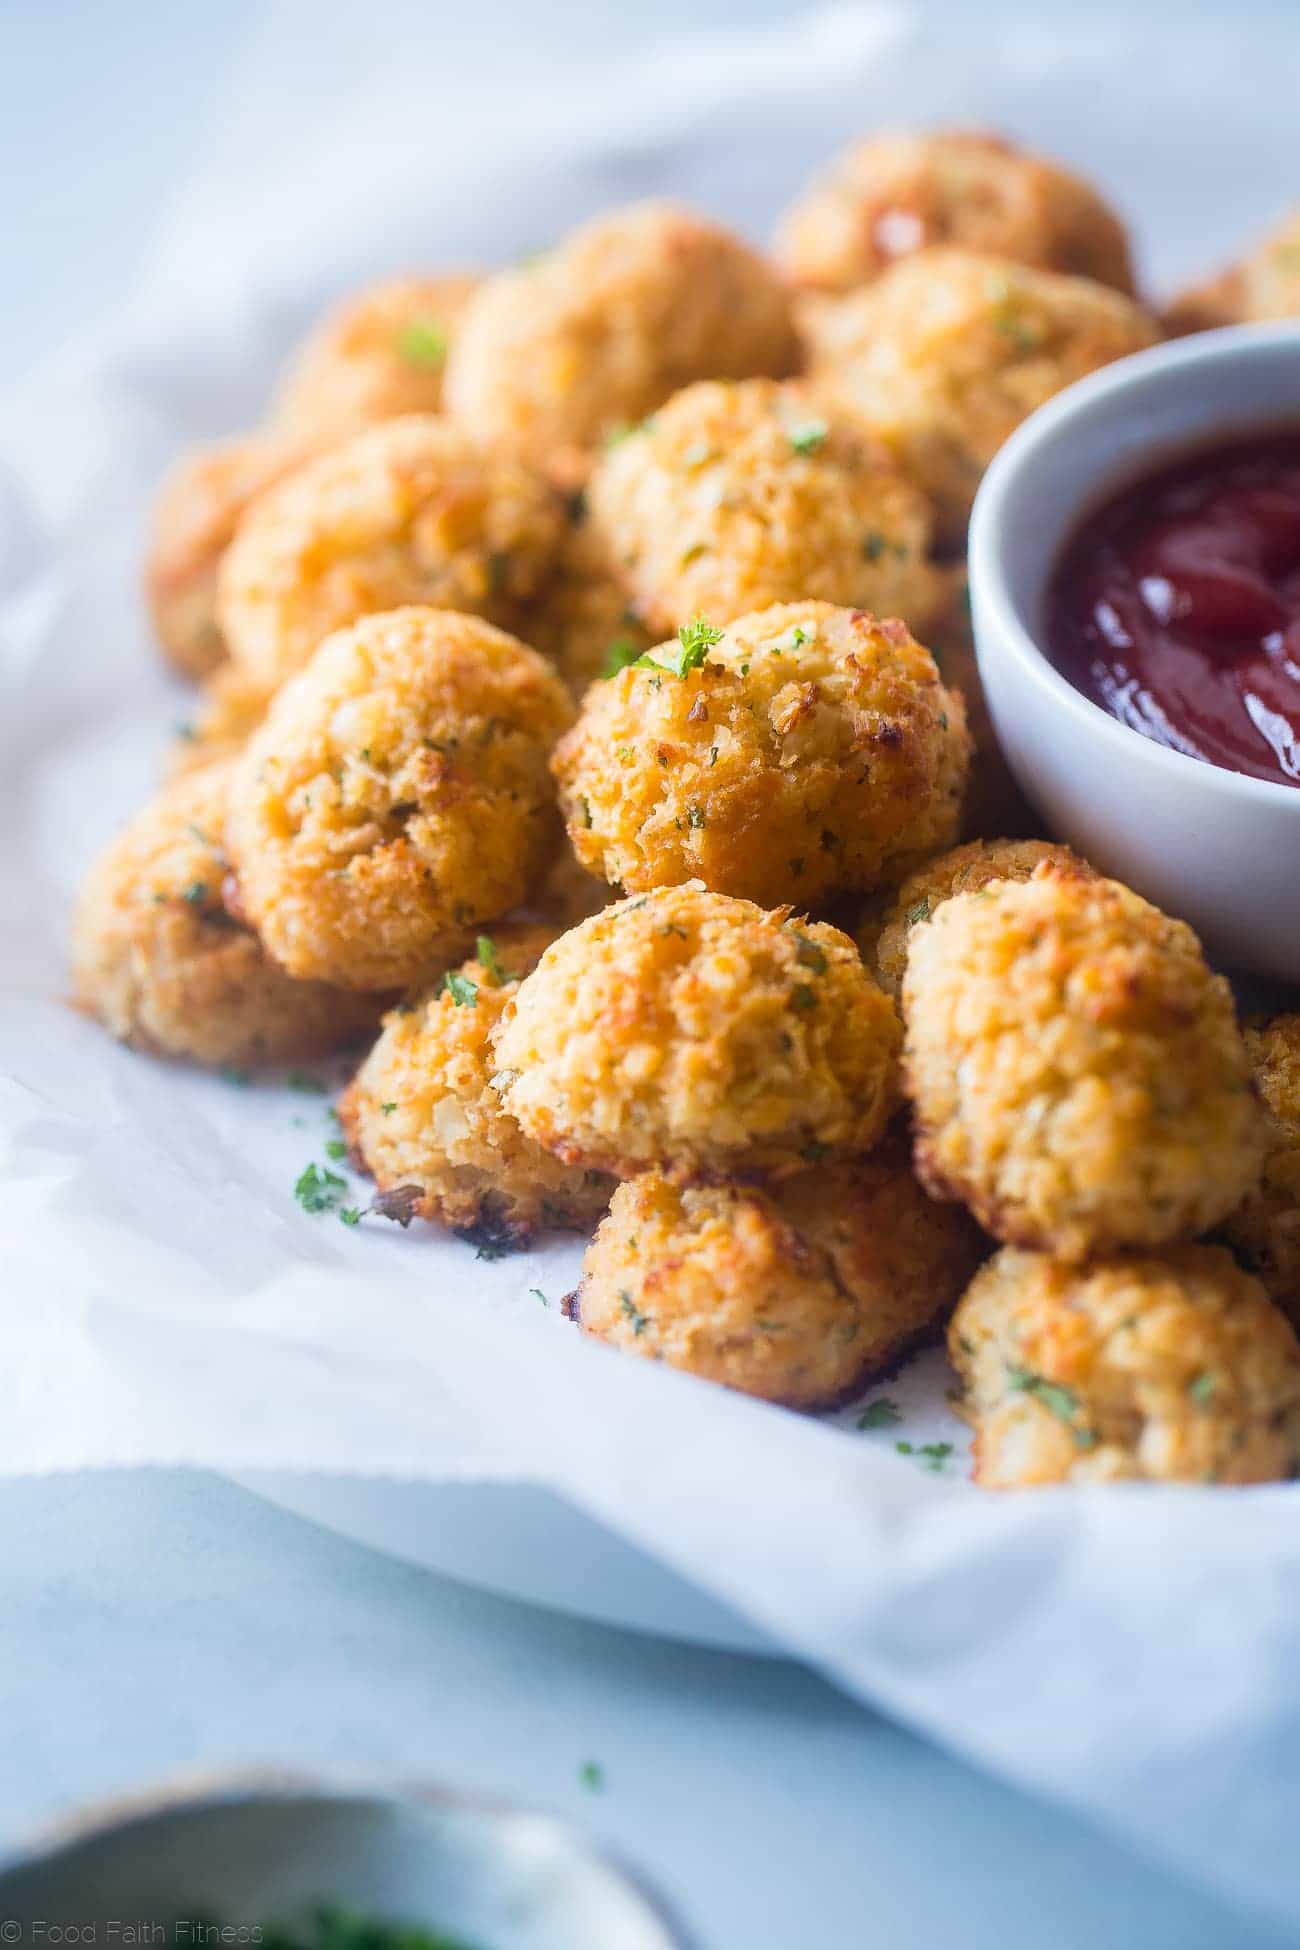 Baked Cauliflower Tater Tots - A gluten free, lower carb version of the classic comfort food that are crispy on the outside and soft on the inside. You'll never know they're healthy and made from hidden veggies! | Foodfaithfitness.com | @FoodFaithFit